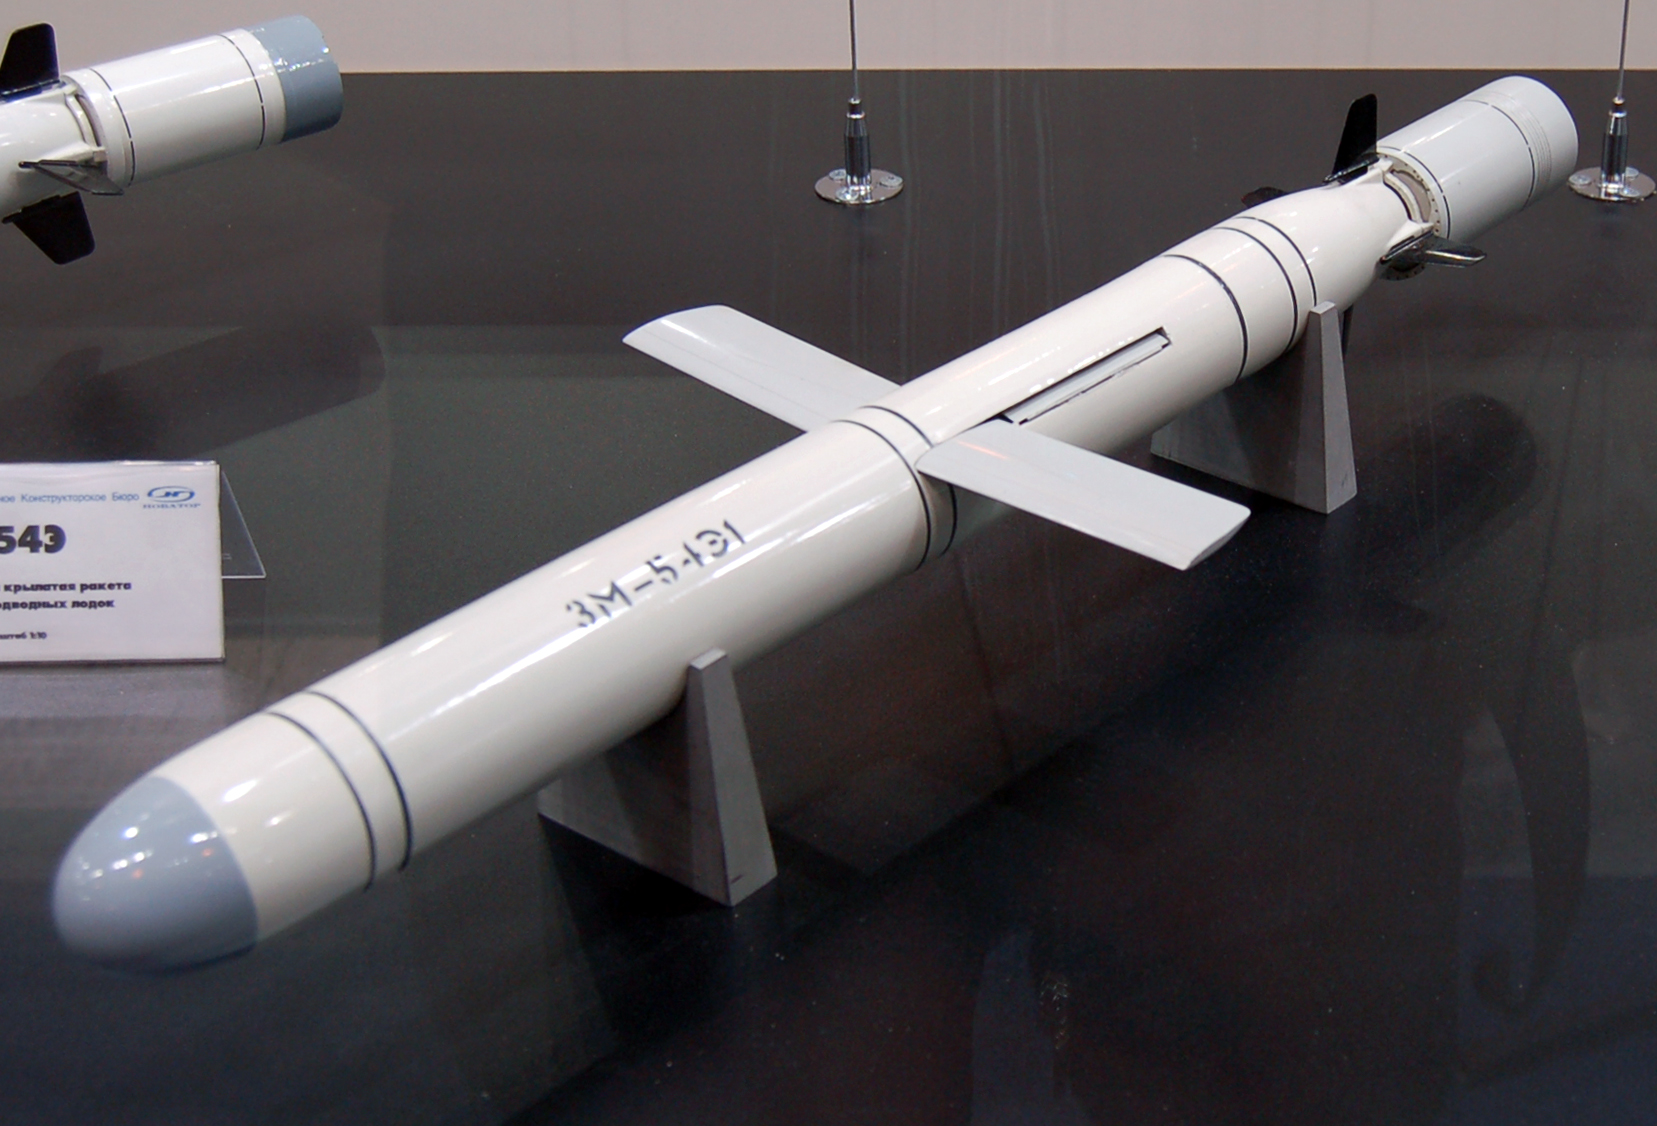 russian cruise missile images